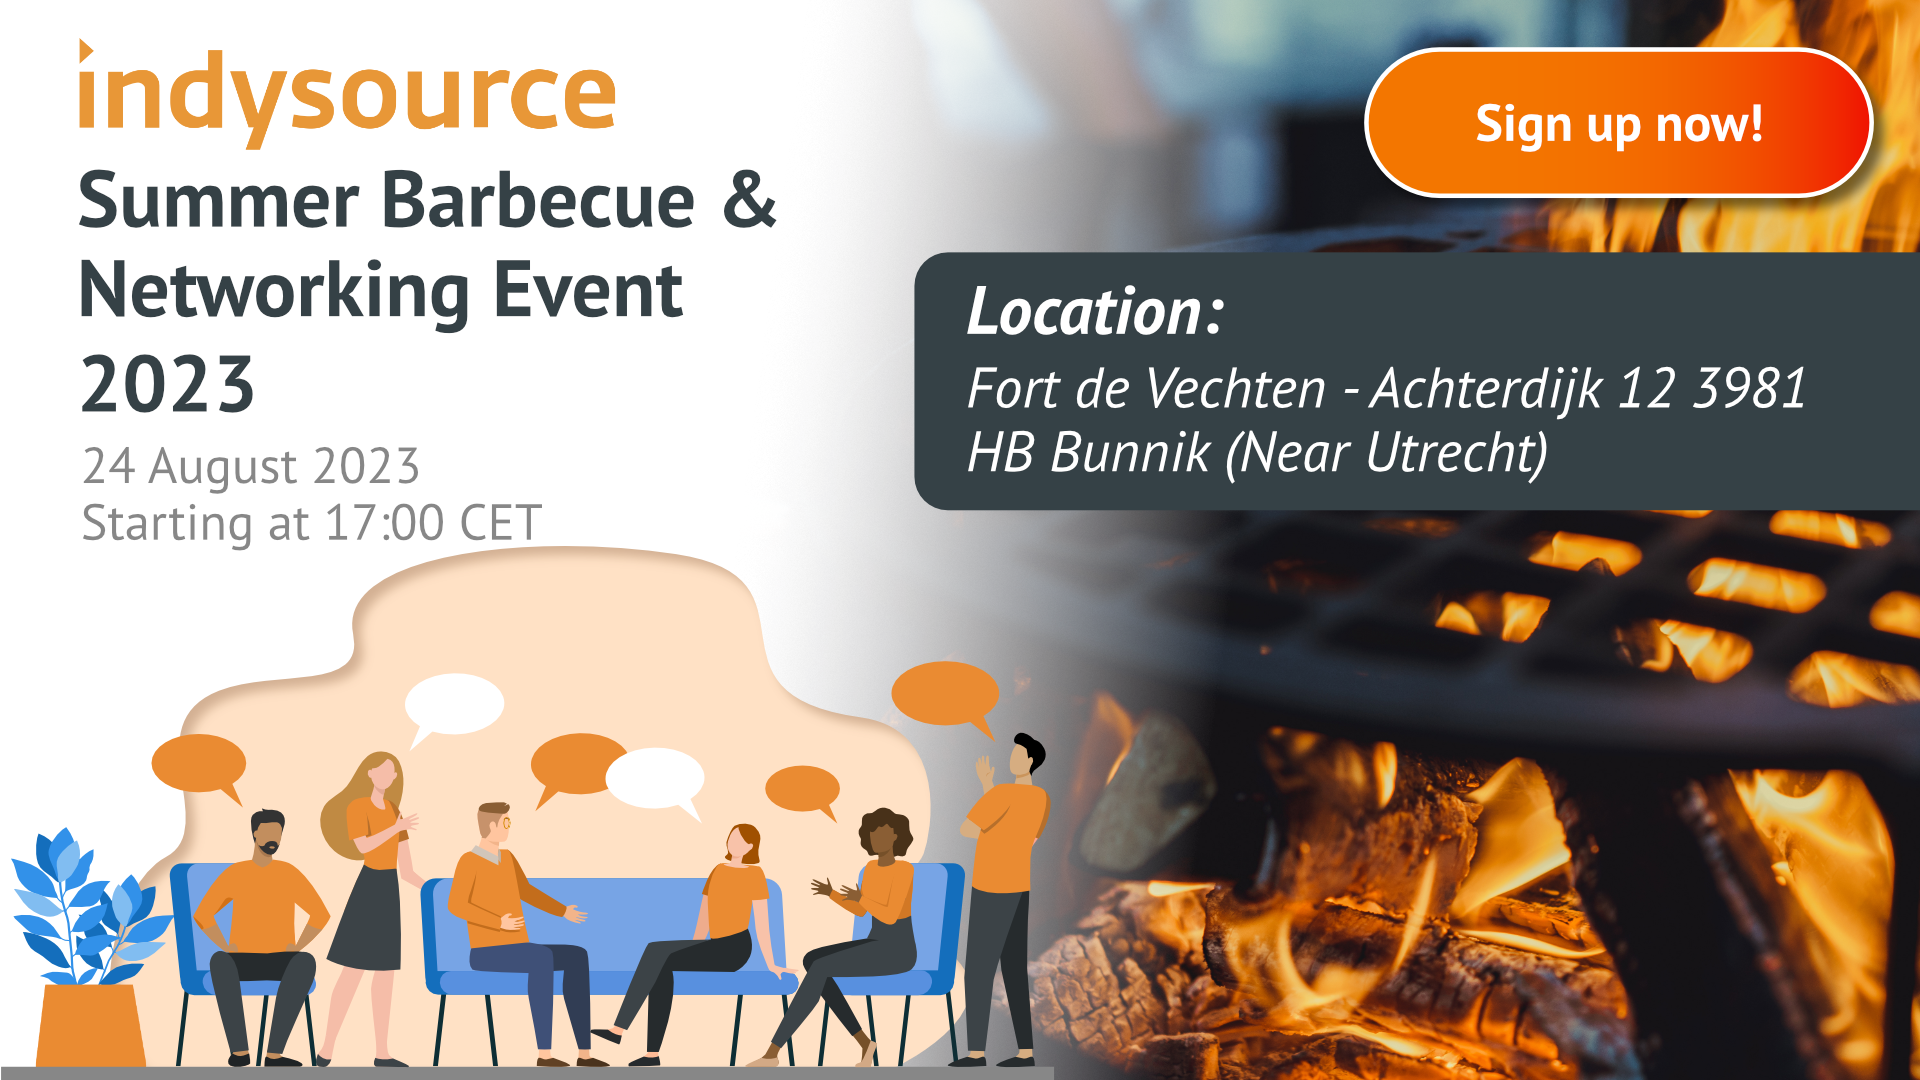 Summer Barbecue & Networking Event